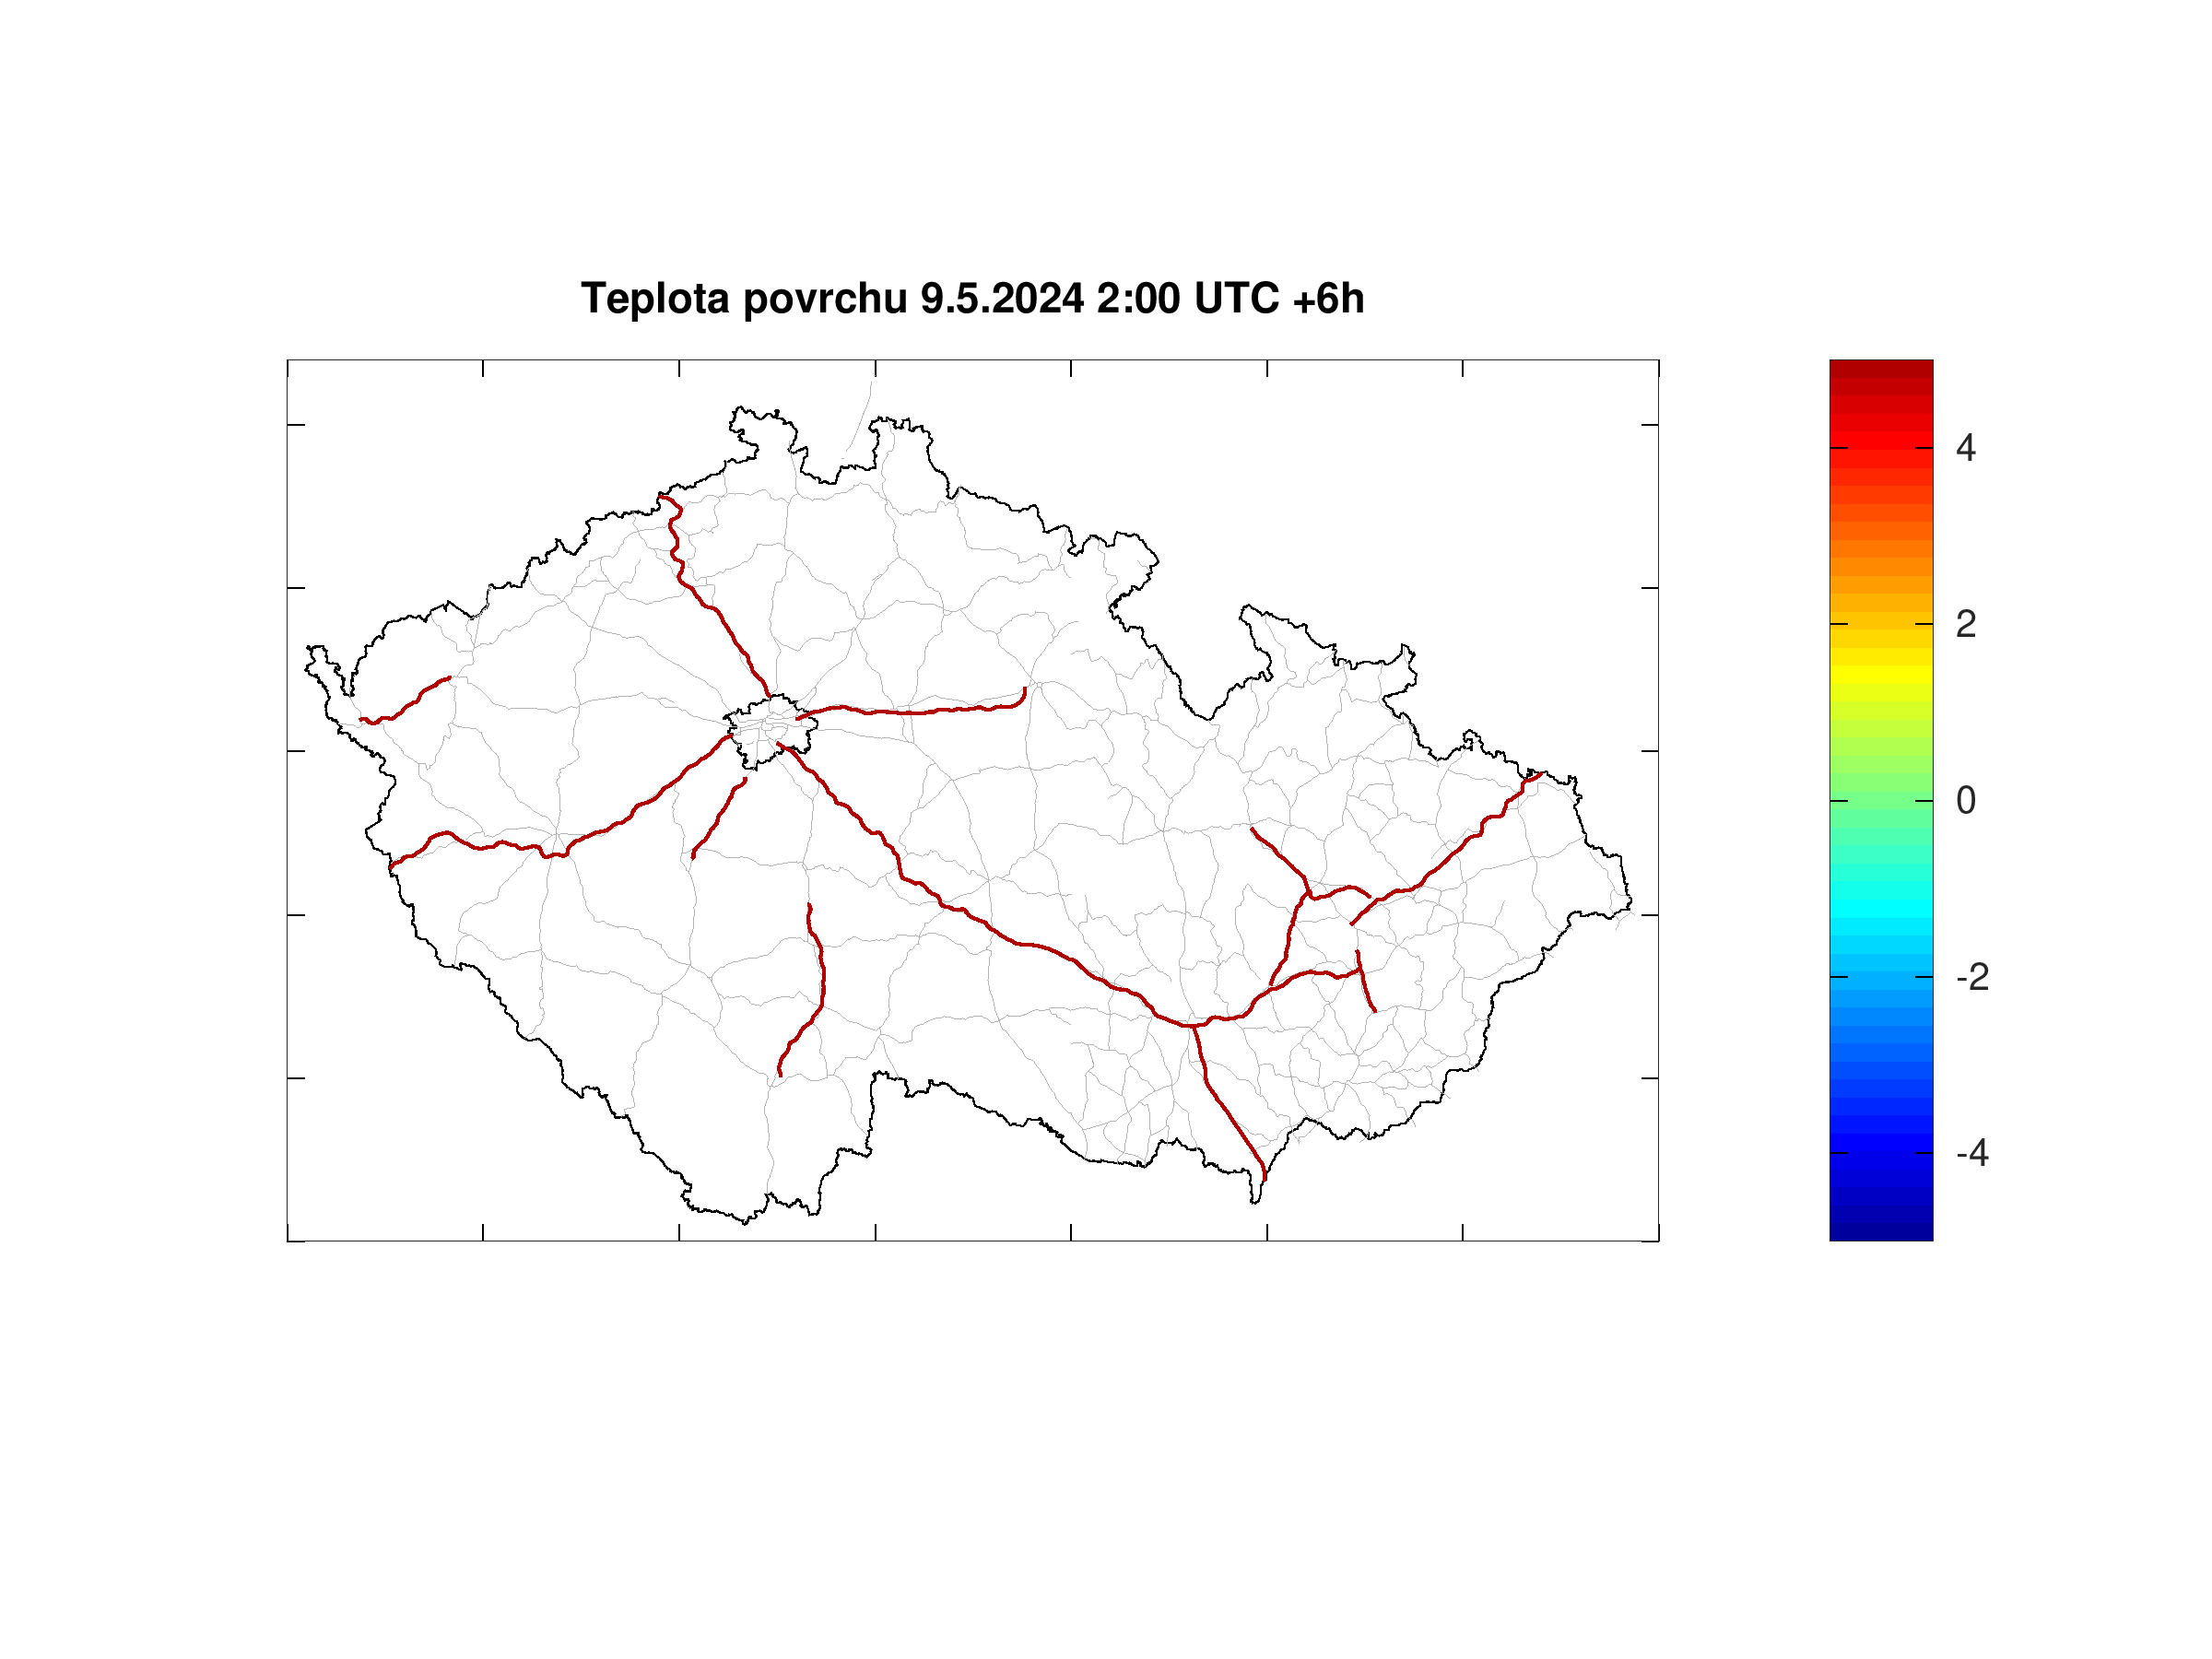 Road surface teperature forecast for Czech highways +6h